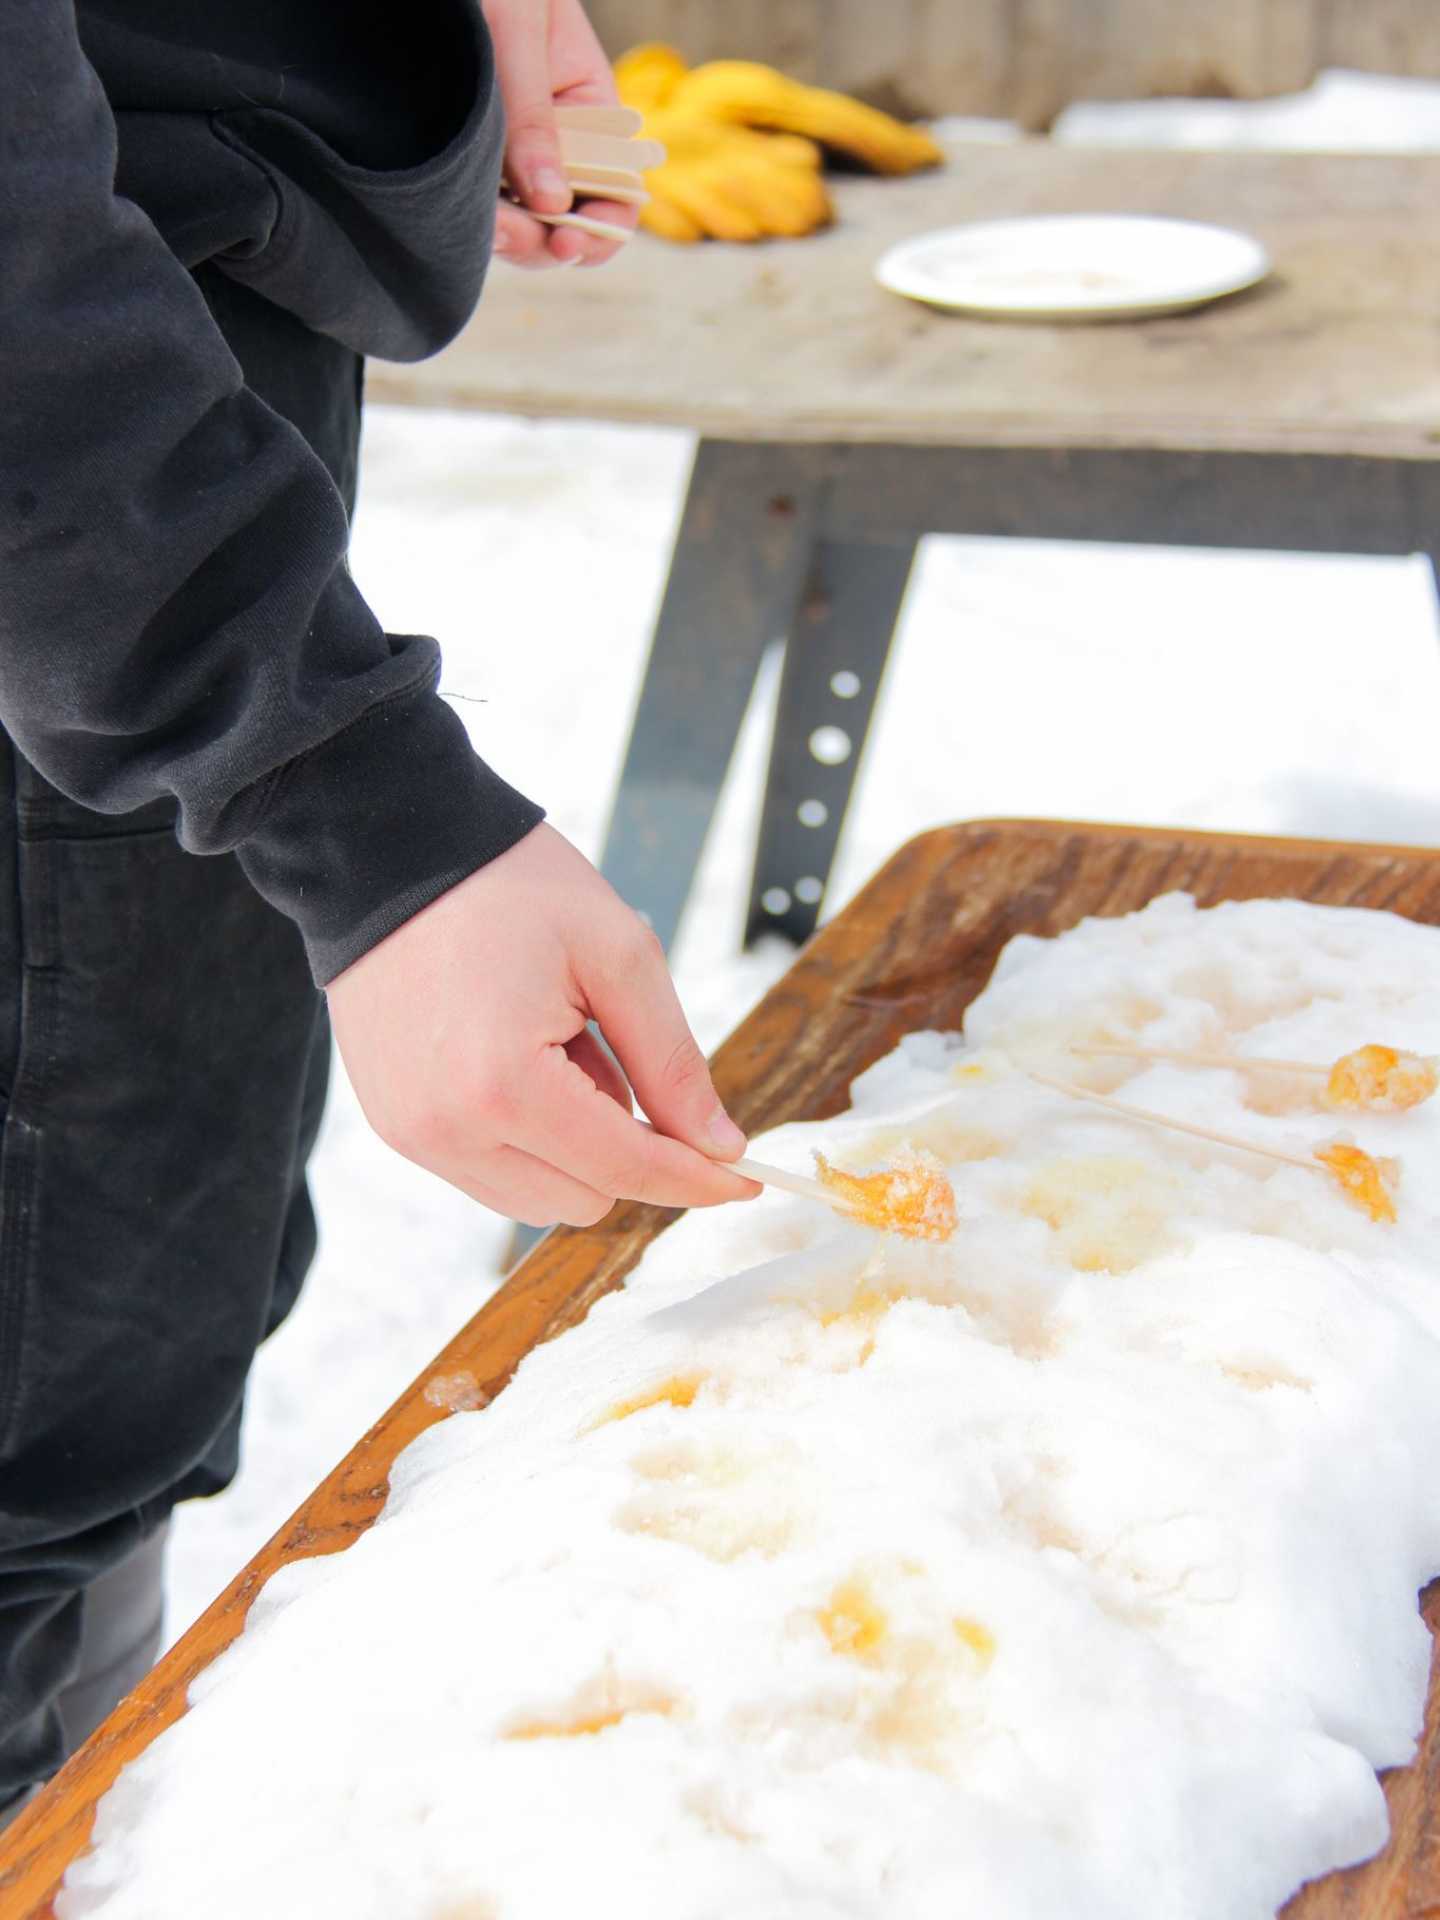 Rural Route Tour Co. maple syrup farm tour | Maple taffy being scooped up from a pile of snow